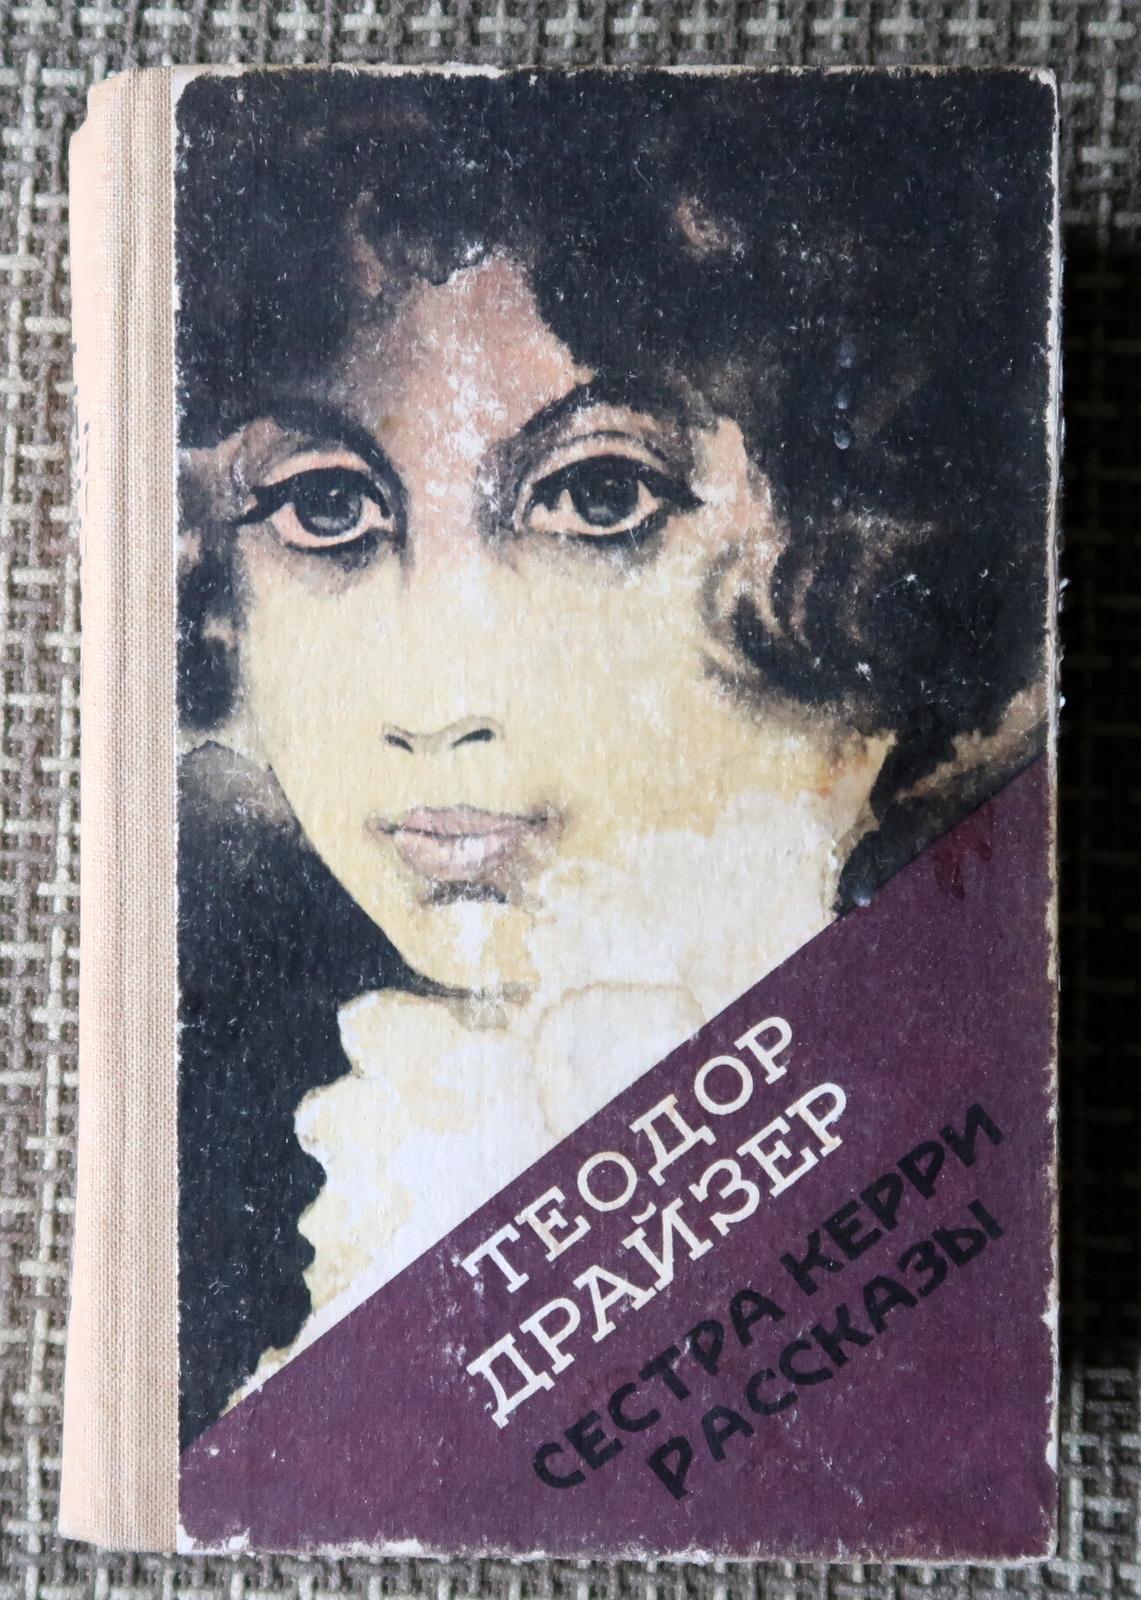 Embark on a literary voyage with this captivating vintage book, 'Sister Carrie and Other Stories' by Theodore Dreiser, from the USSR. Circa 1985, this book is a cherished piece of literary history, offering a collection of timeless stories that have